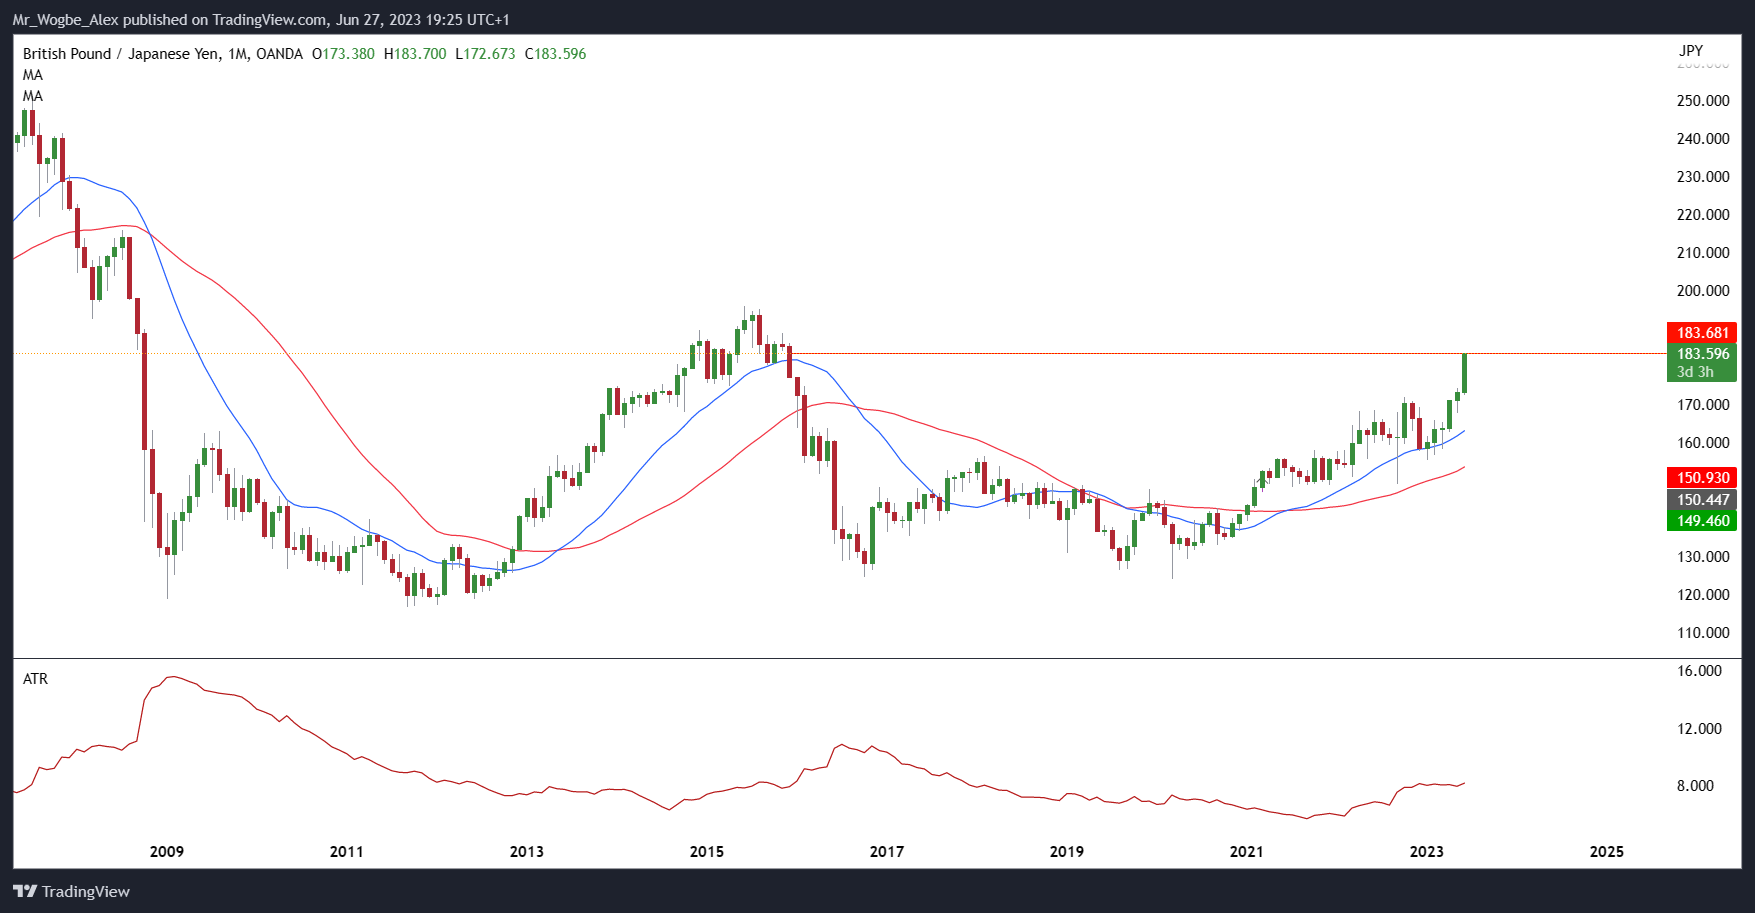 GBP/JPY monthly chart from TradingView